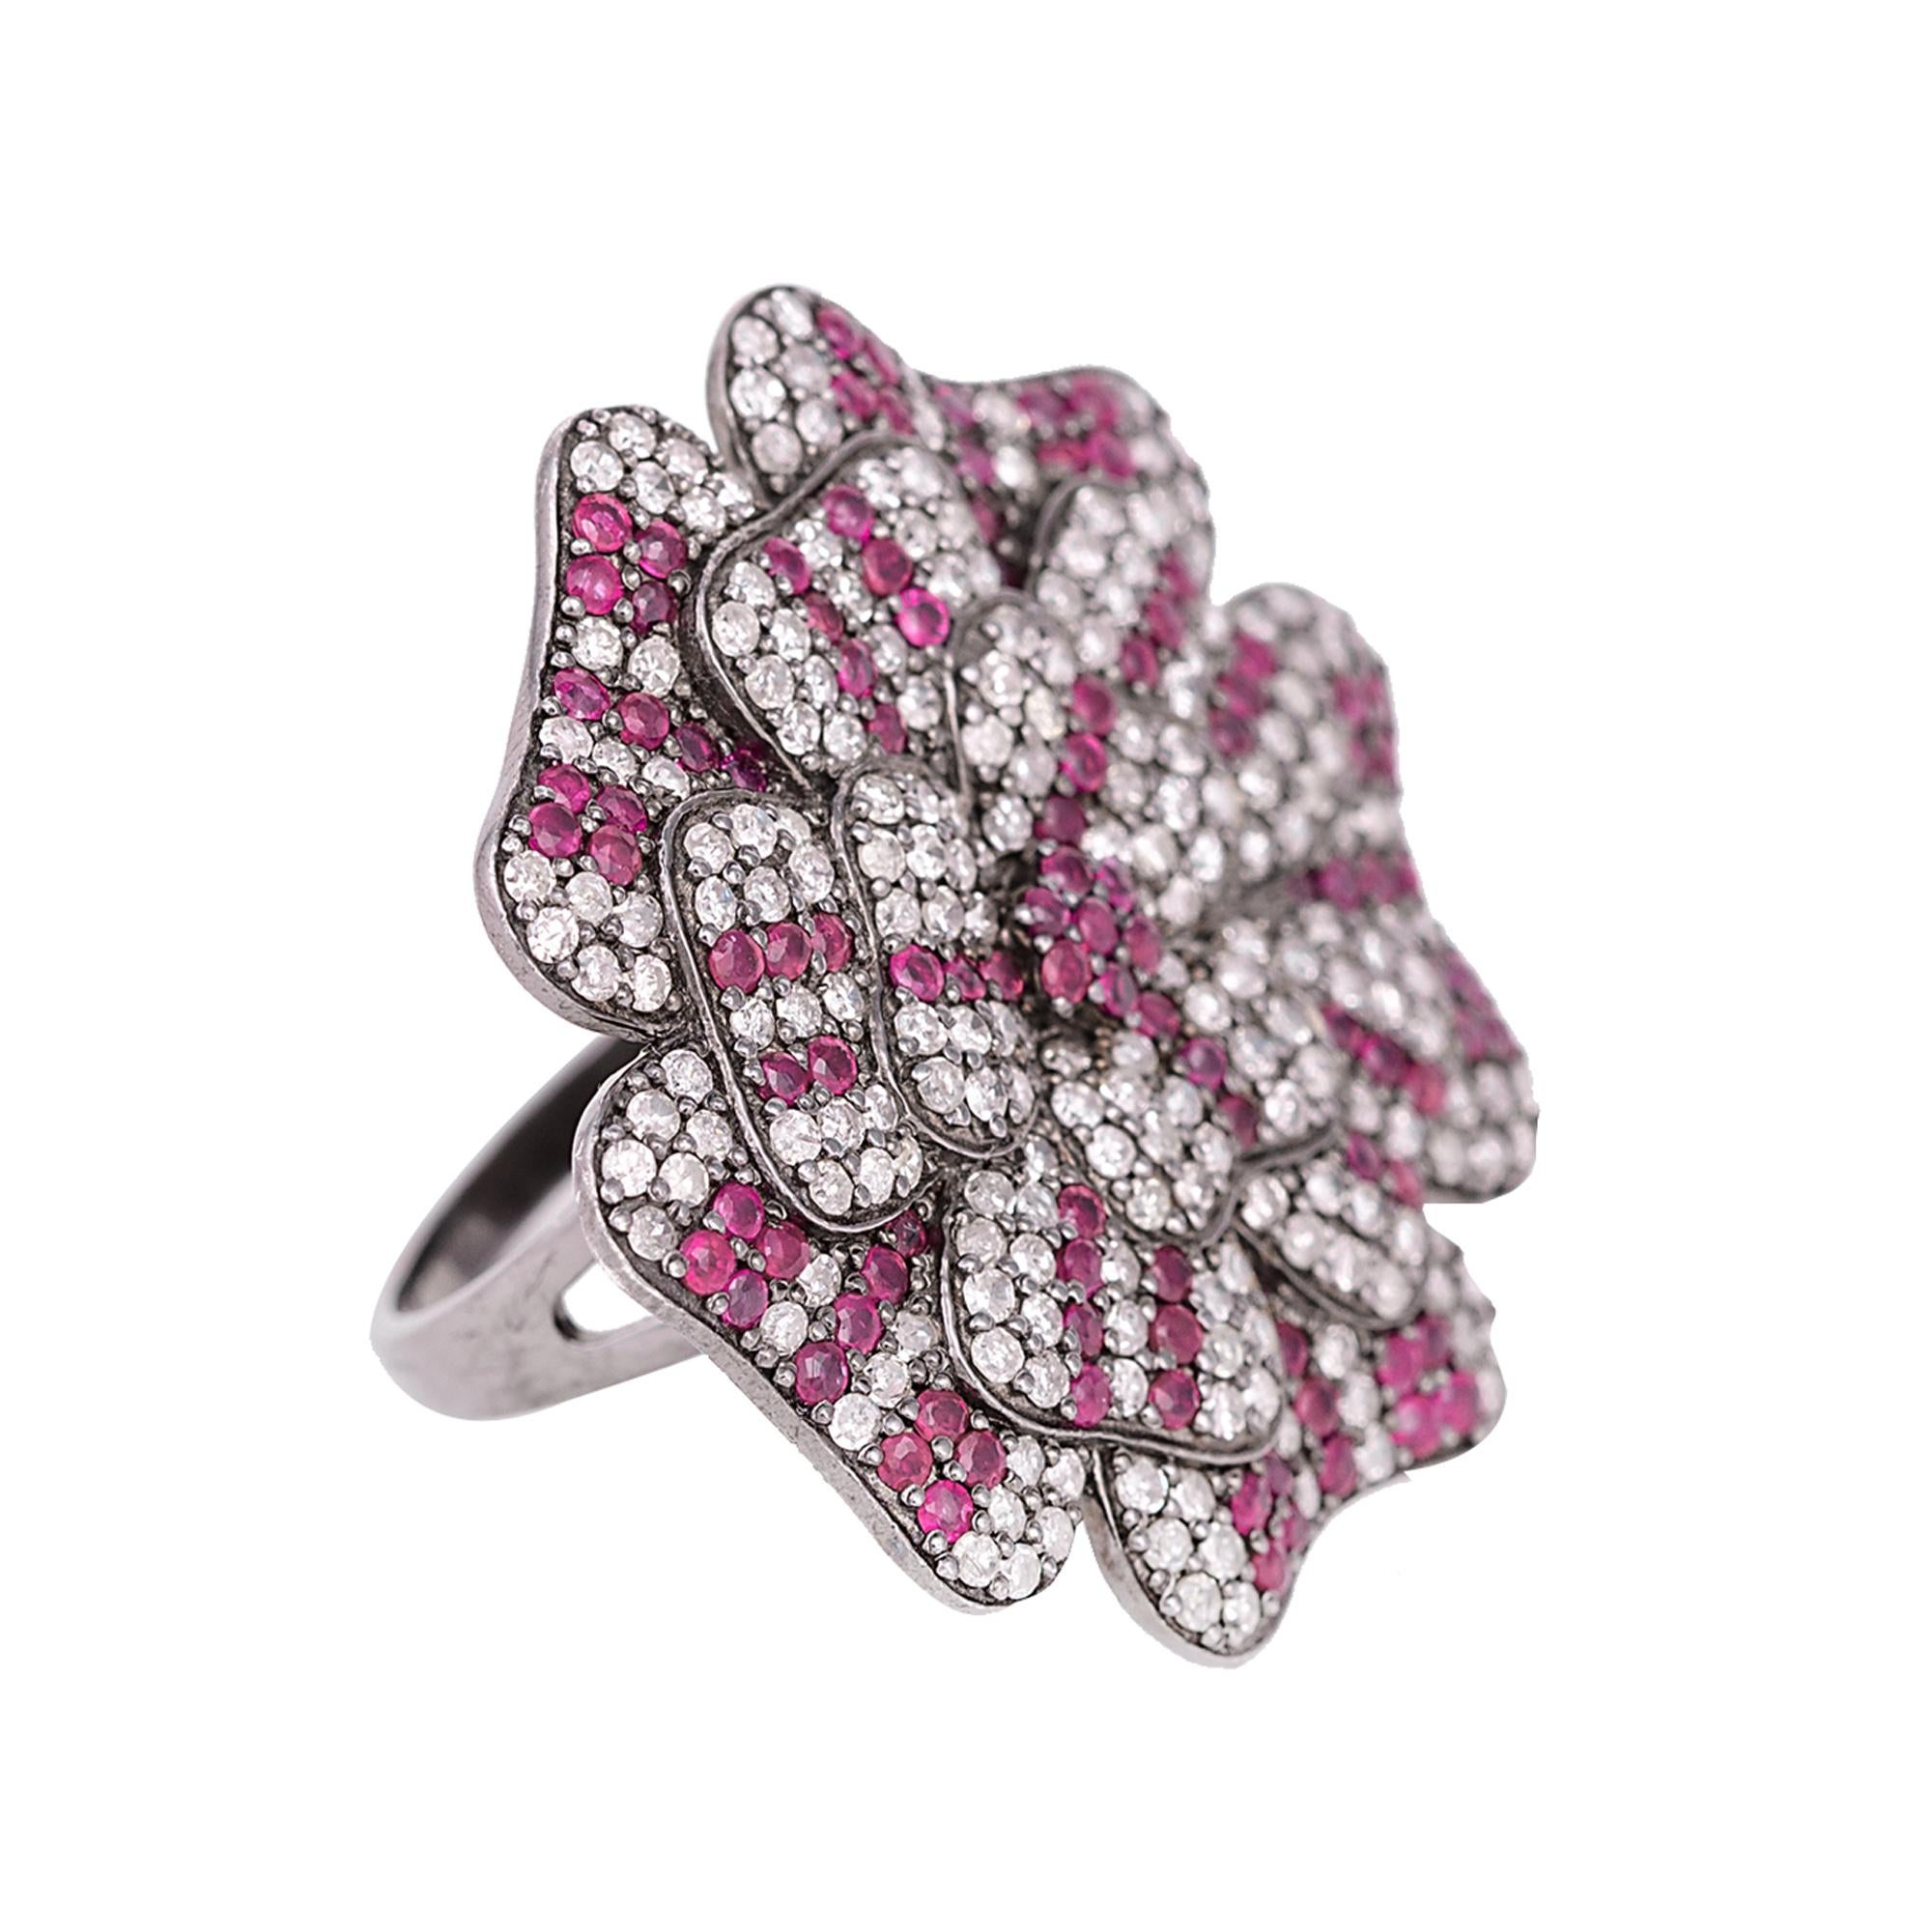 2.37 Carat Diamond and Ruby Flower Statement Fashion Ring in Victorian Style

This Victorian era art-deco style floral enchanting pink-red ruby and diamond ring is eternal. The numerous rows of pave set round diamonds contrasted with the brilliant